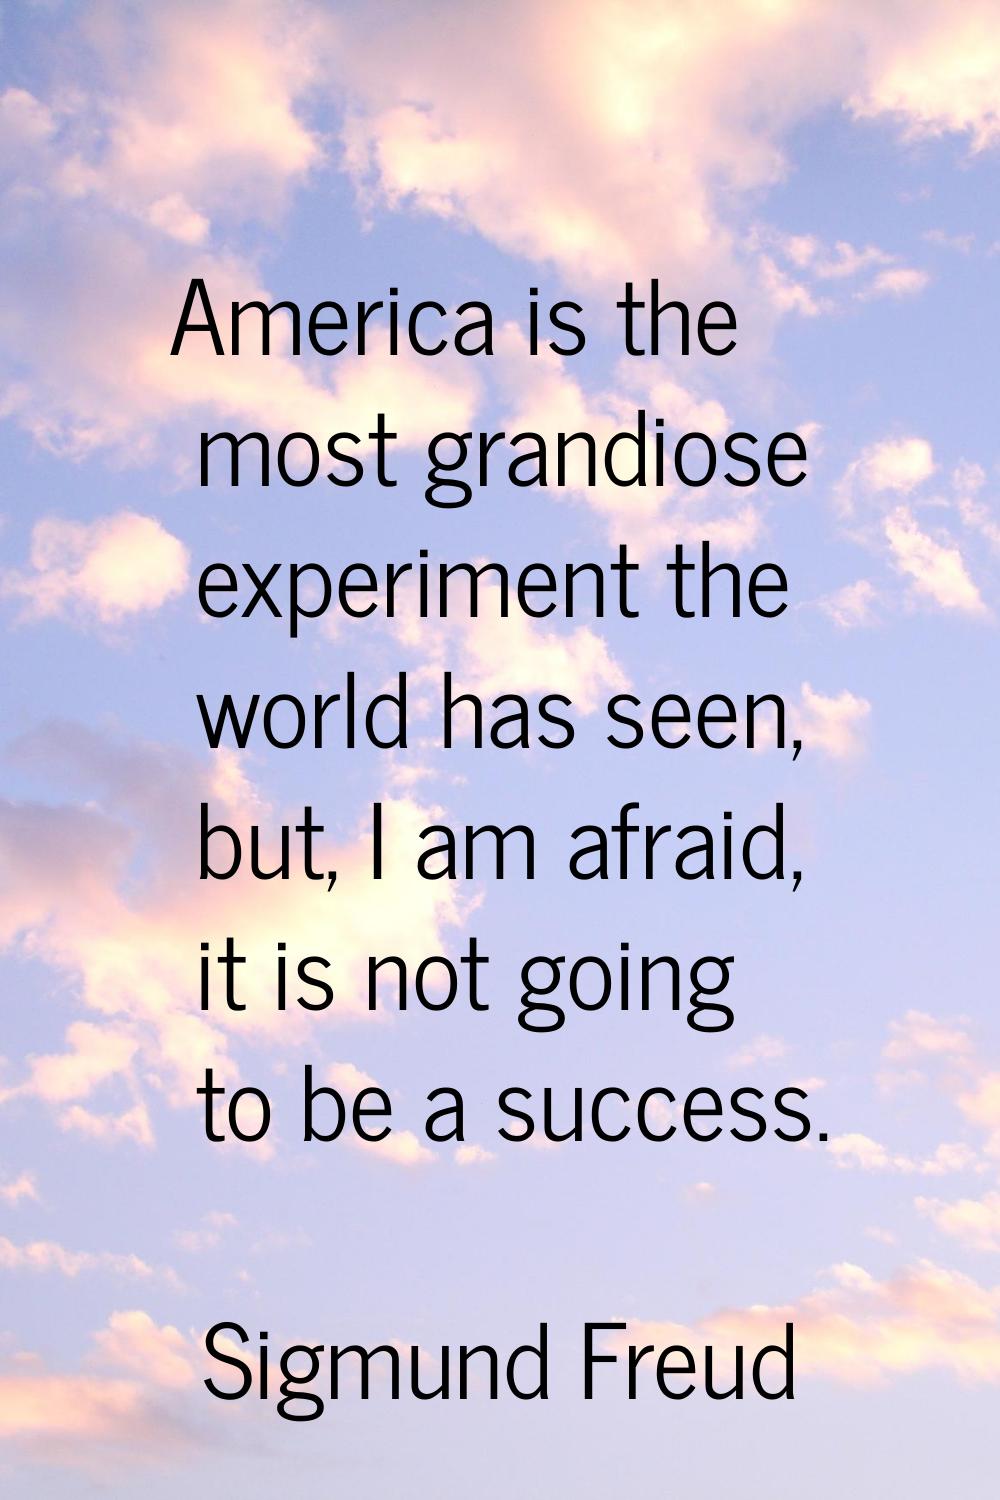 America is the most grandiose experiment the world has seen, but, I am afraid, it is not going to b